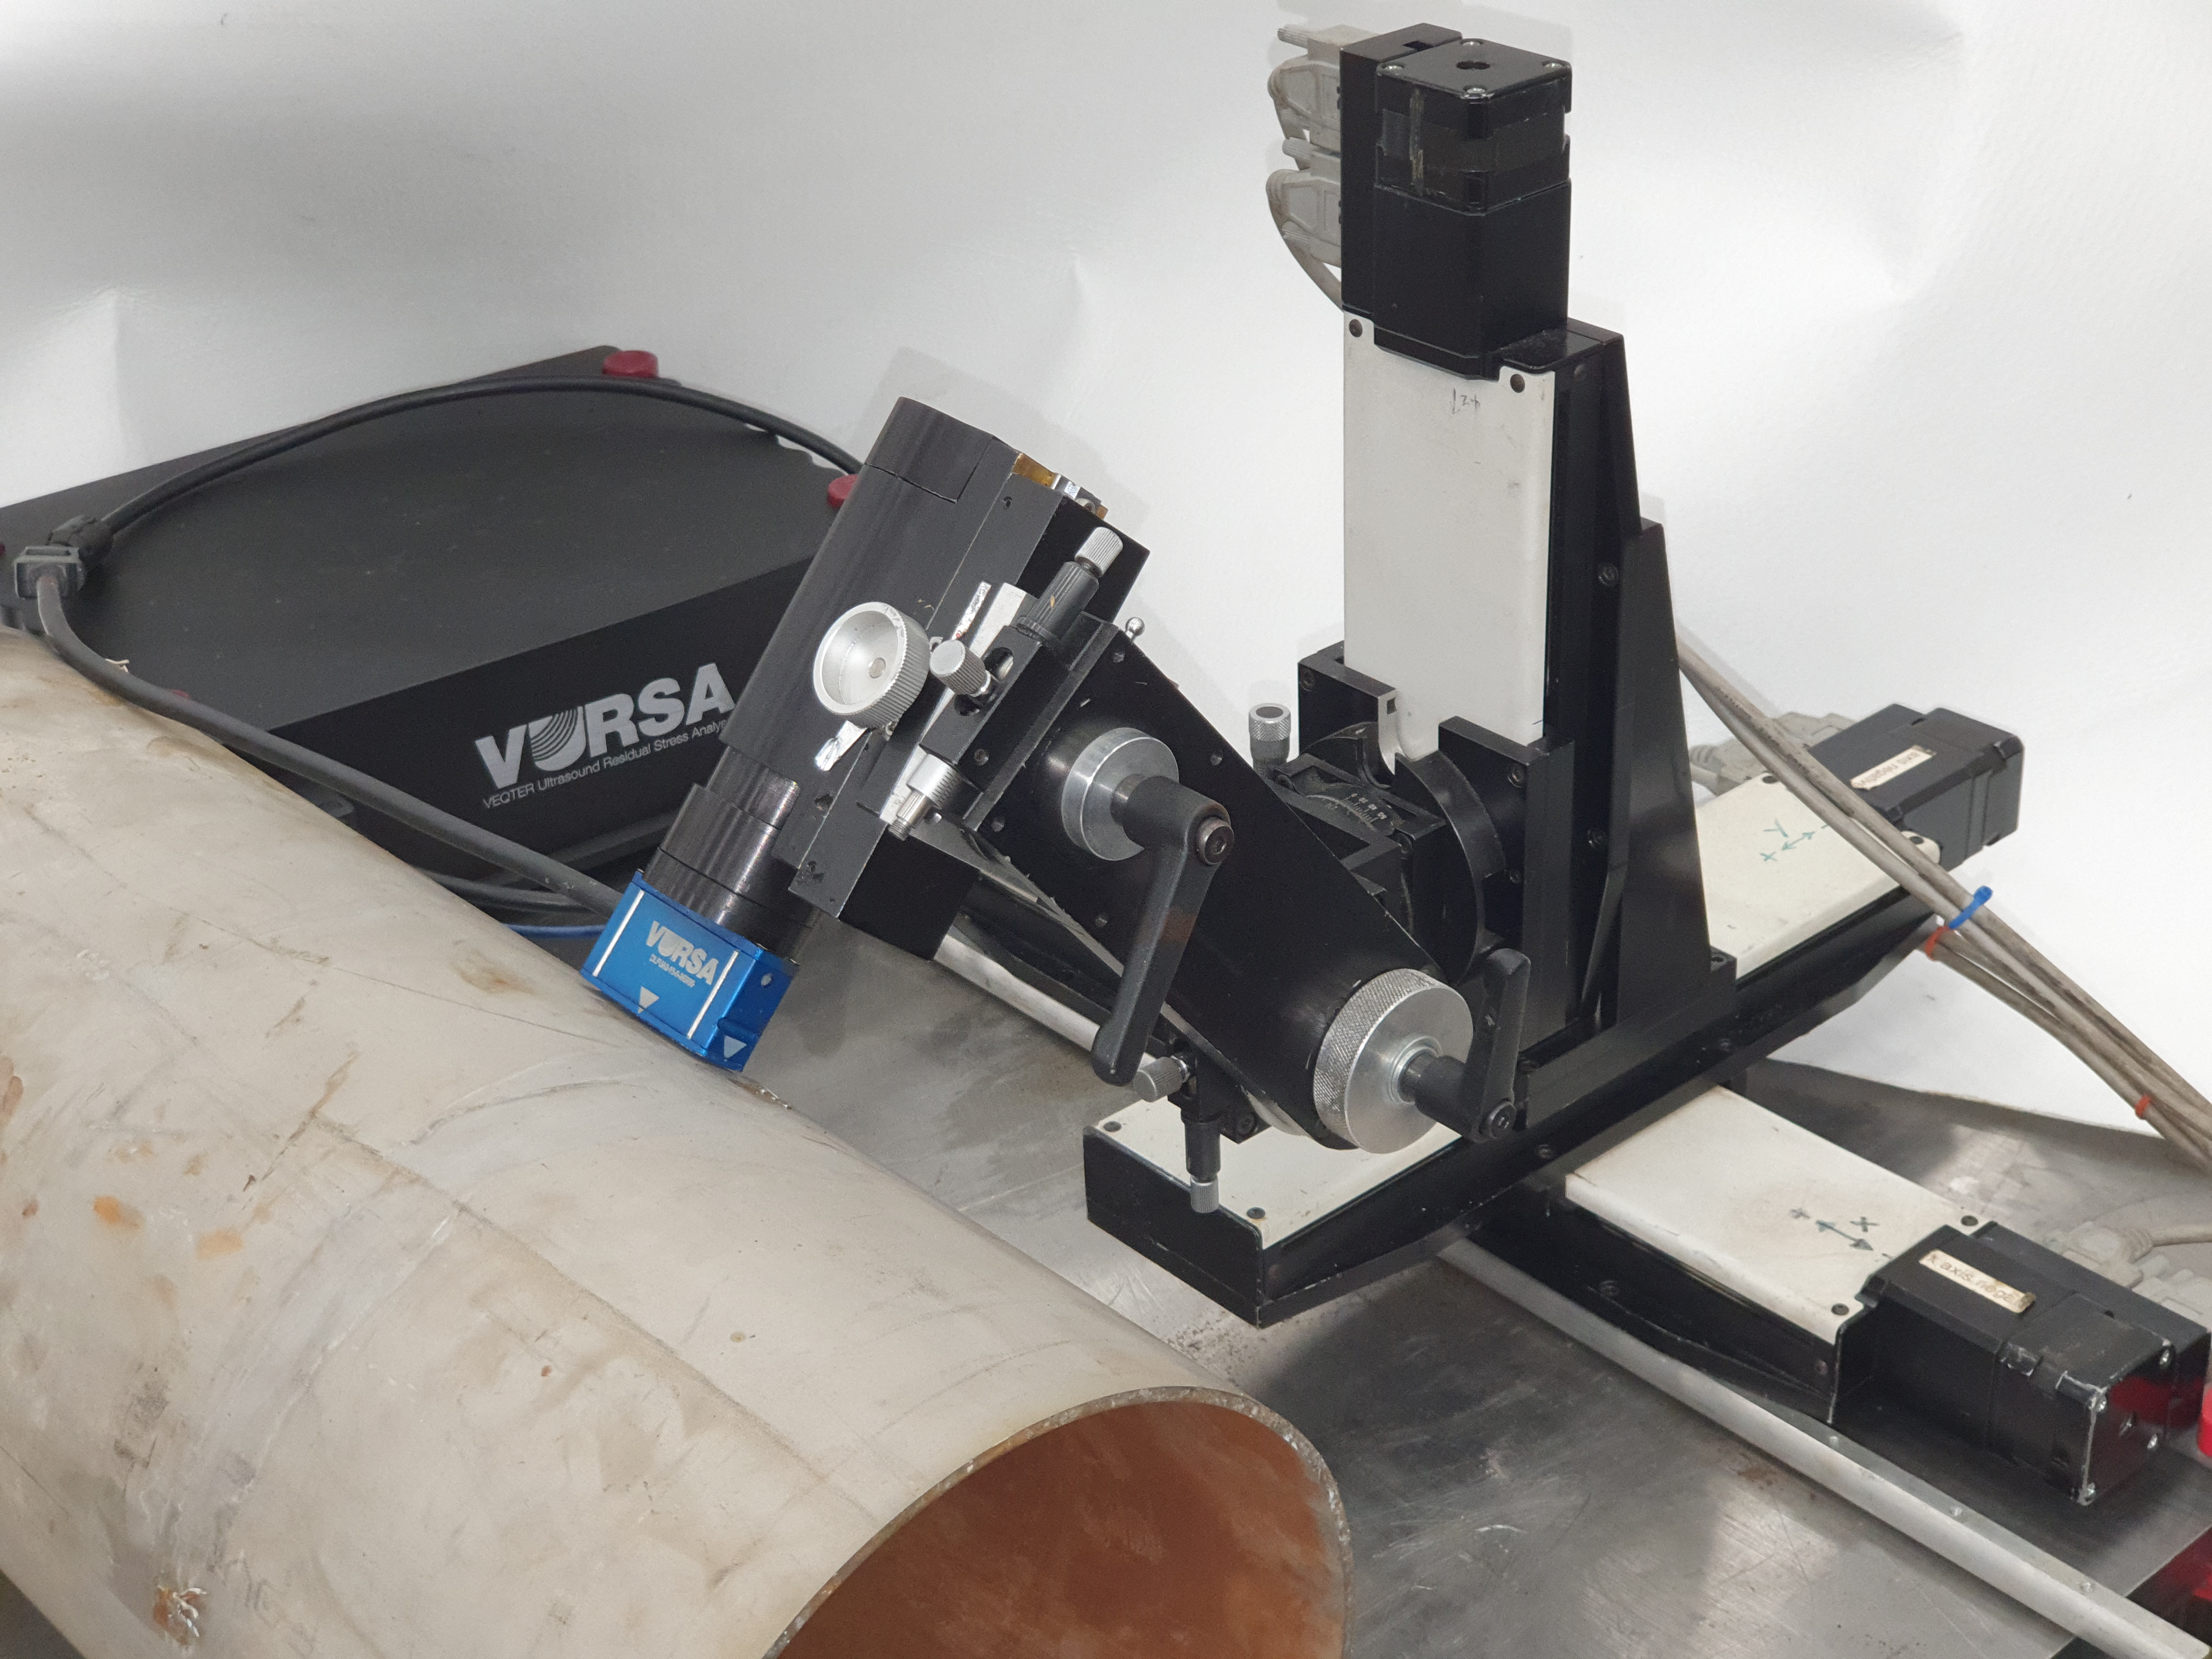 Residual stress mapping measurement of a 4-point, plastically bent beam using an XYZ table